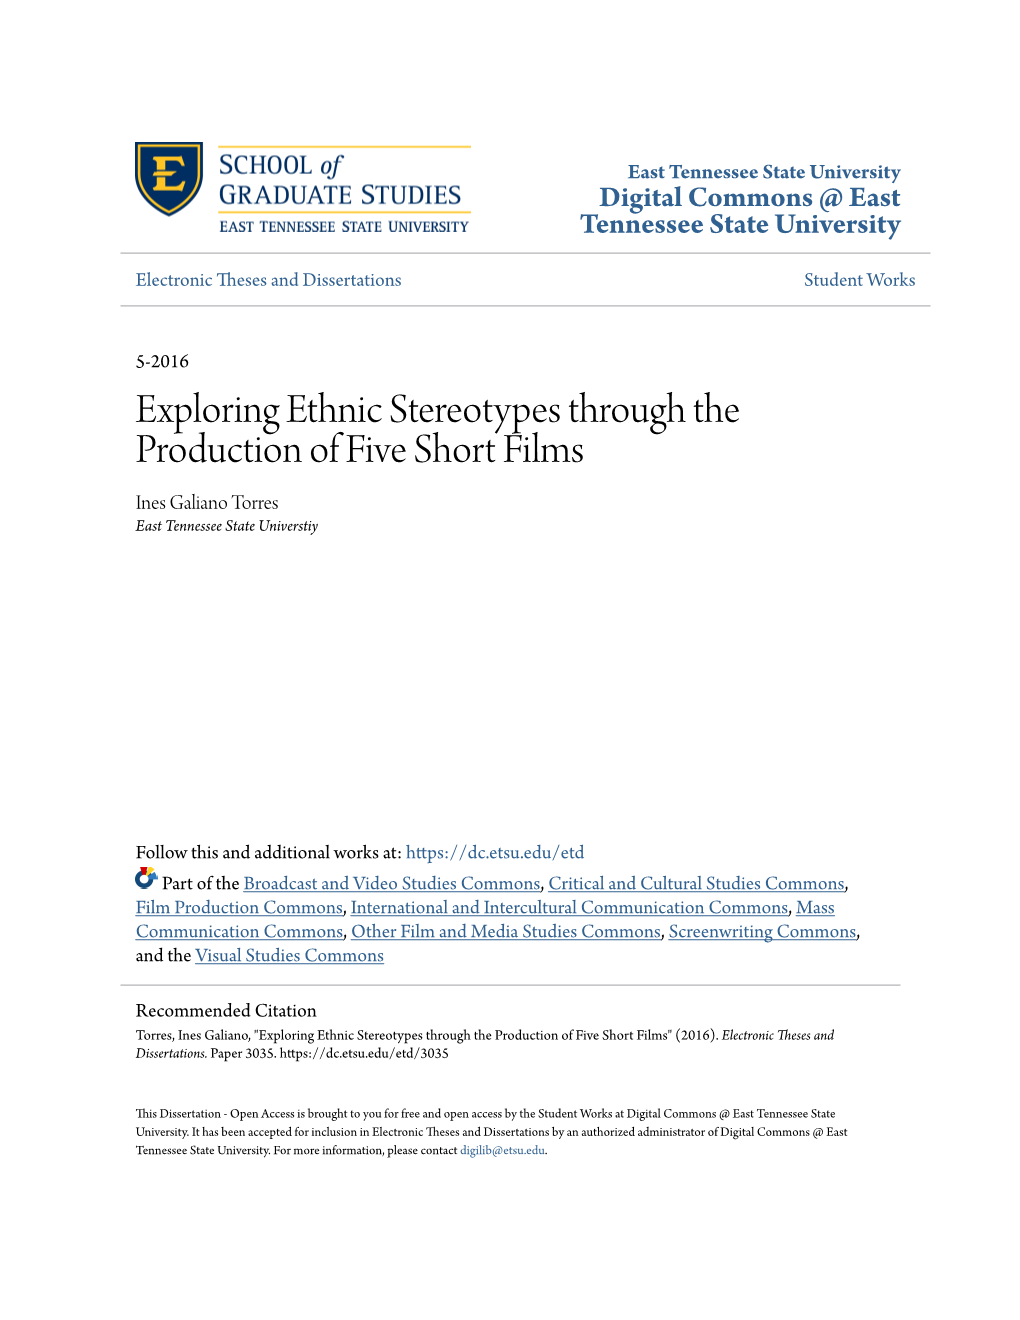 Exploring Ethnic Stereotypes Through the Production of Five Short Films Ines Galiano Torres East Tennessee State Universtiy